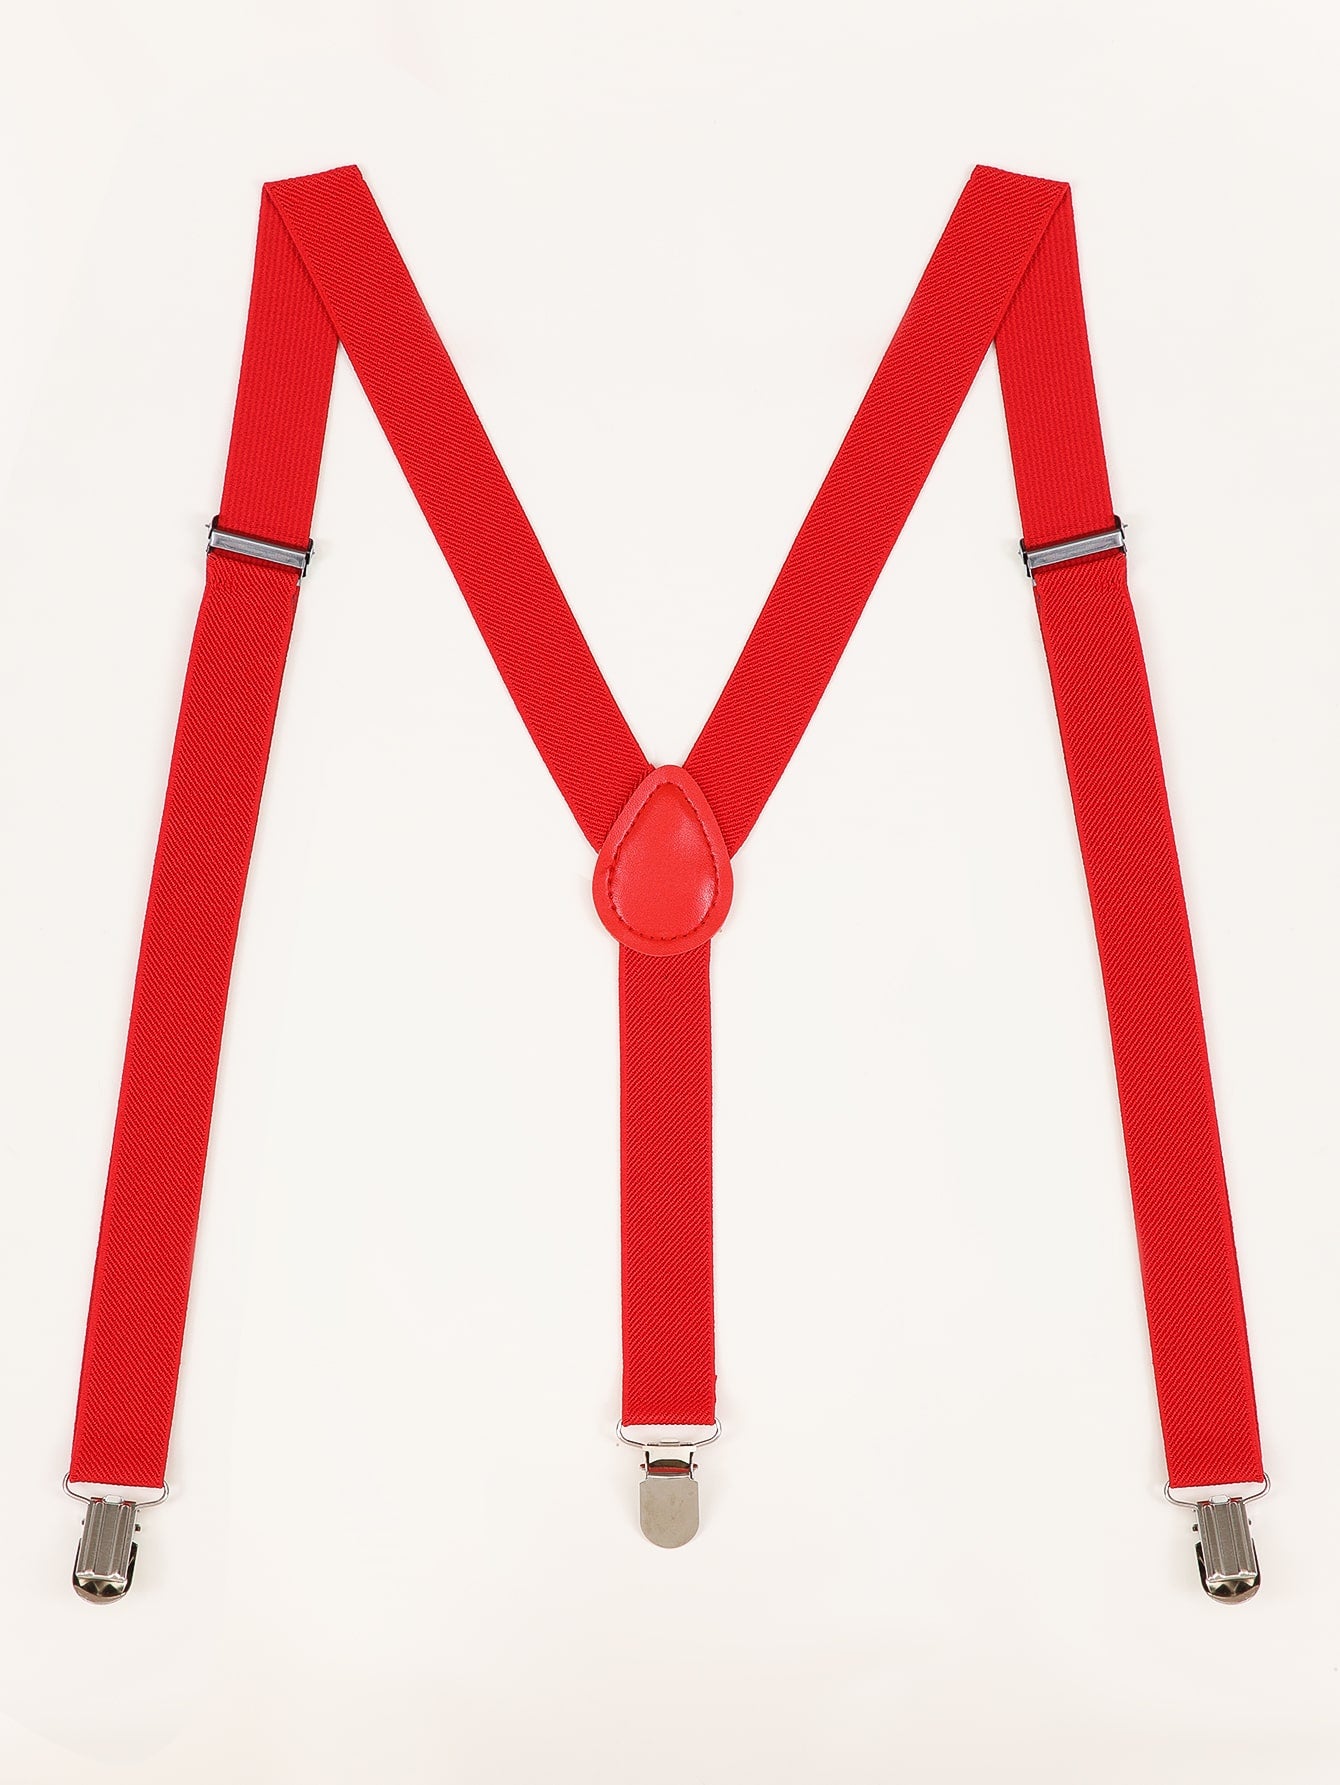 1pc Red Adults Shirt Suspender Trousers Suspenders, Unisex & Adjustable With 3 Clips & Elastic Straps